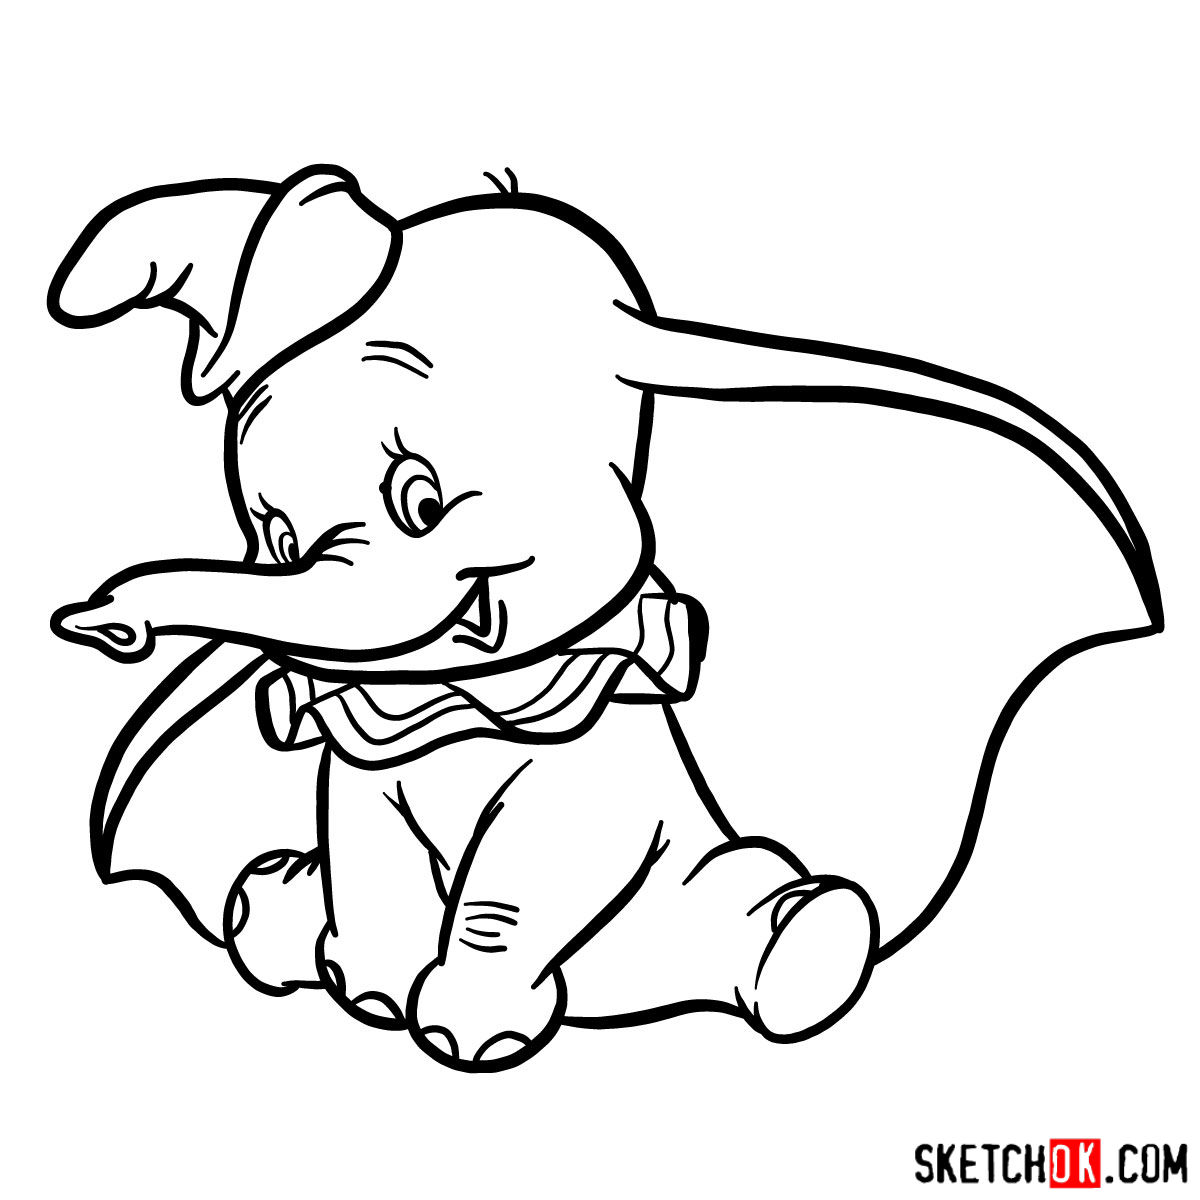 How to draw Dumbo the elephant Sketchok easy drawing guides